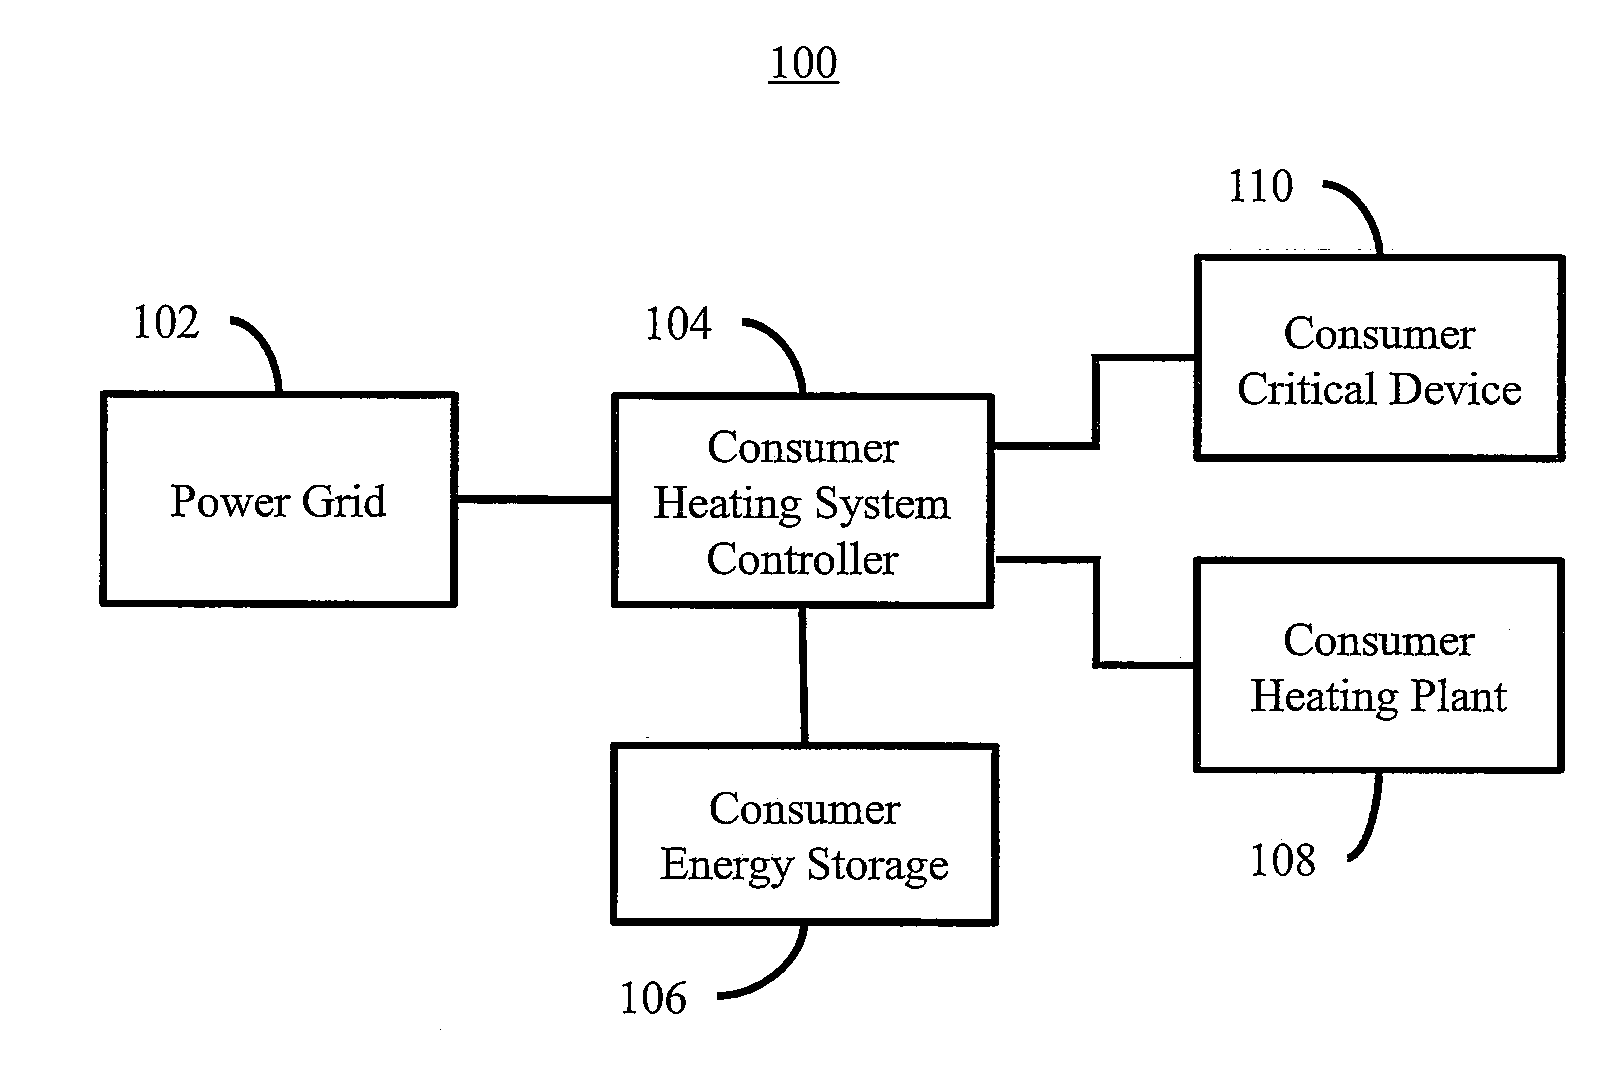 System and Methods for Controlling a Supply of Electric Energy